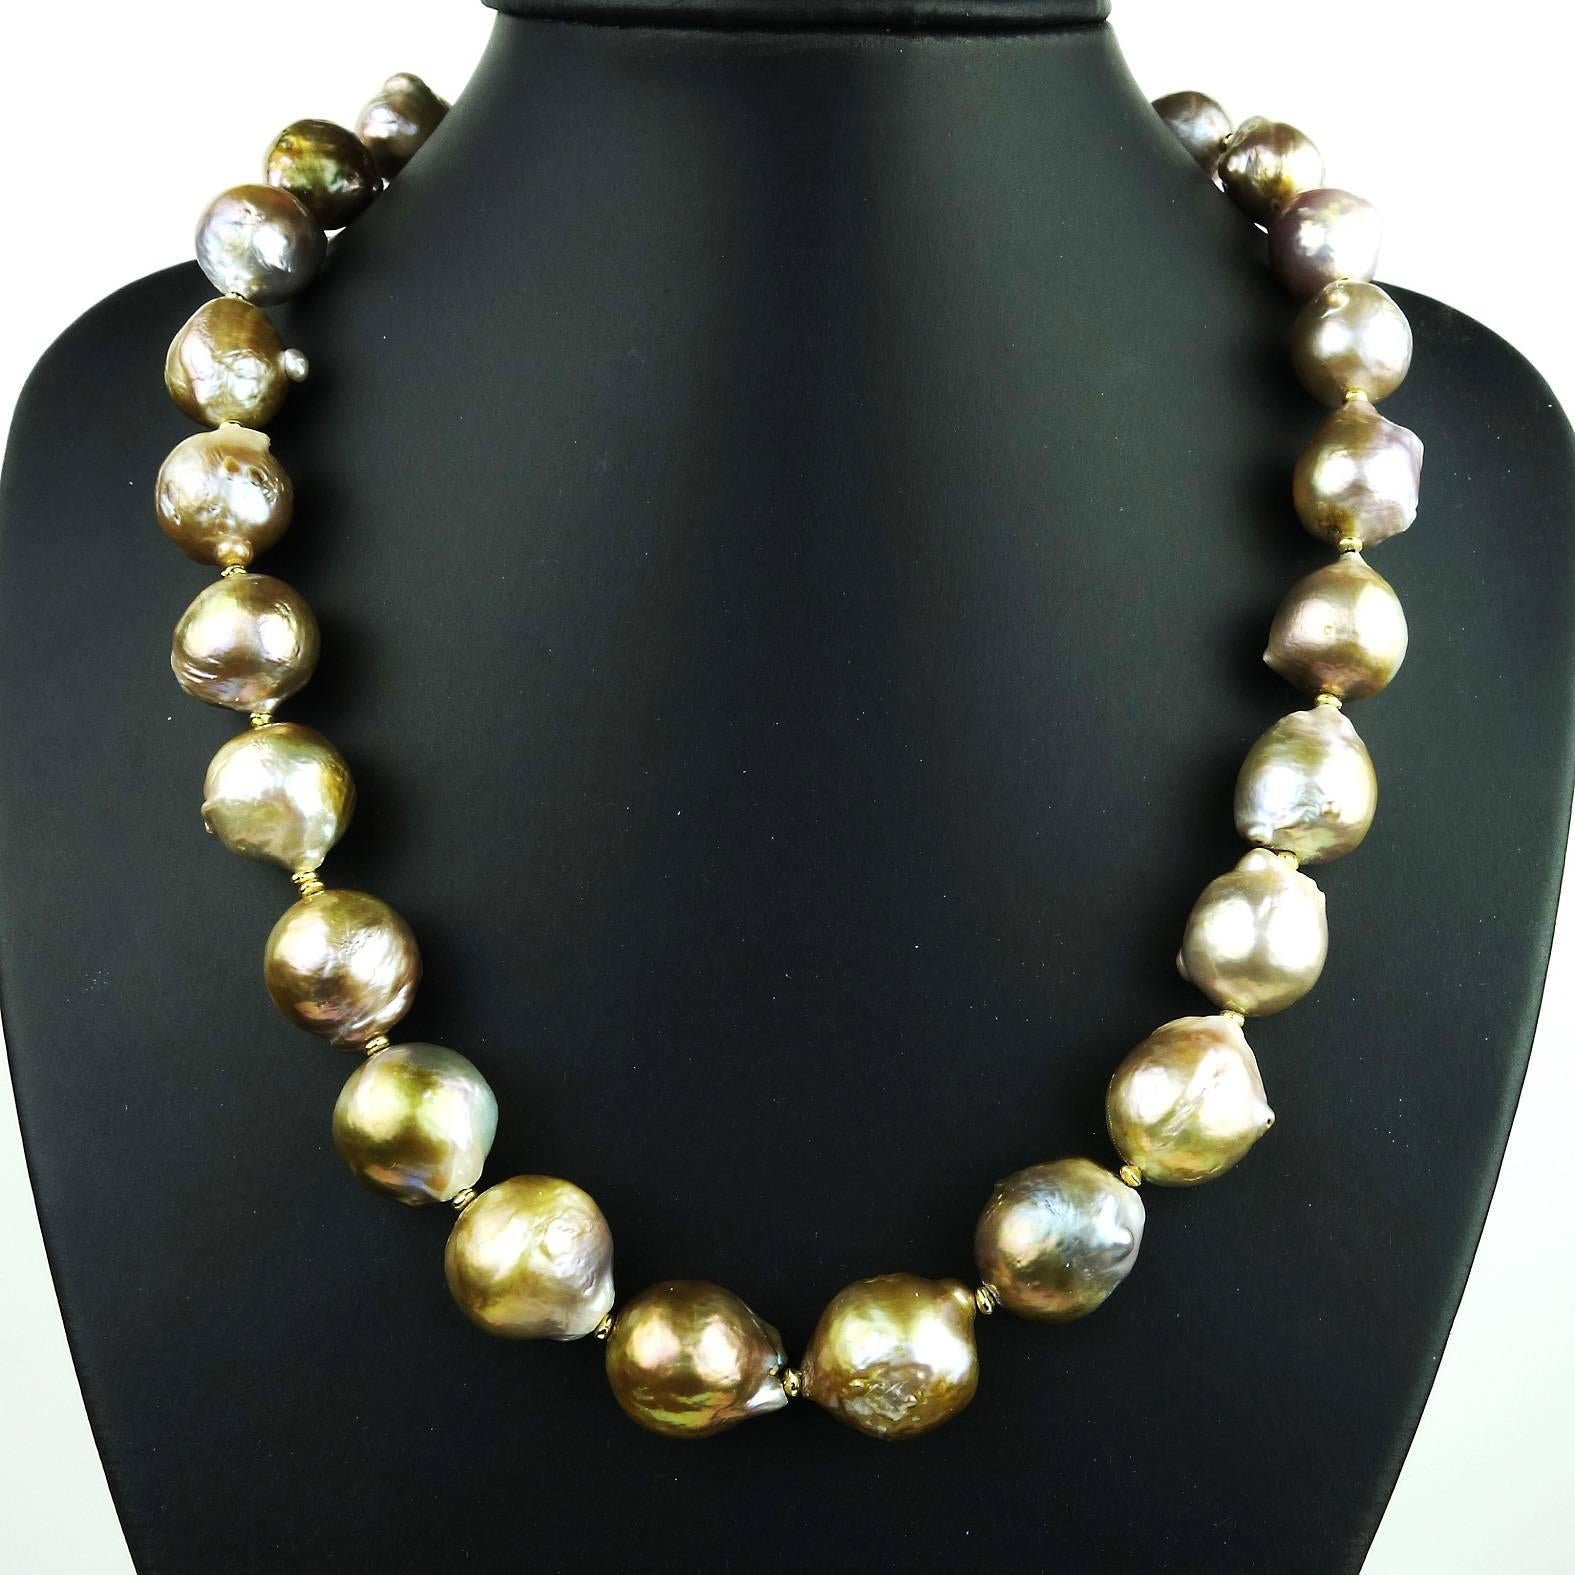 Glamorous large, 14-16MM, custom made Wrinkle Pearl necklace in iridescent shades of gold, silver, mauve, and pink. These magnificent pearls each have a unique look and feel.  They are accented with tiny gold tone spacers and secured with a gold